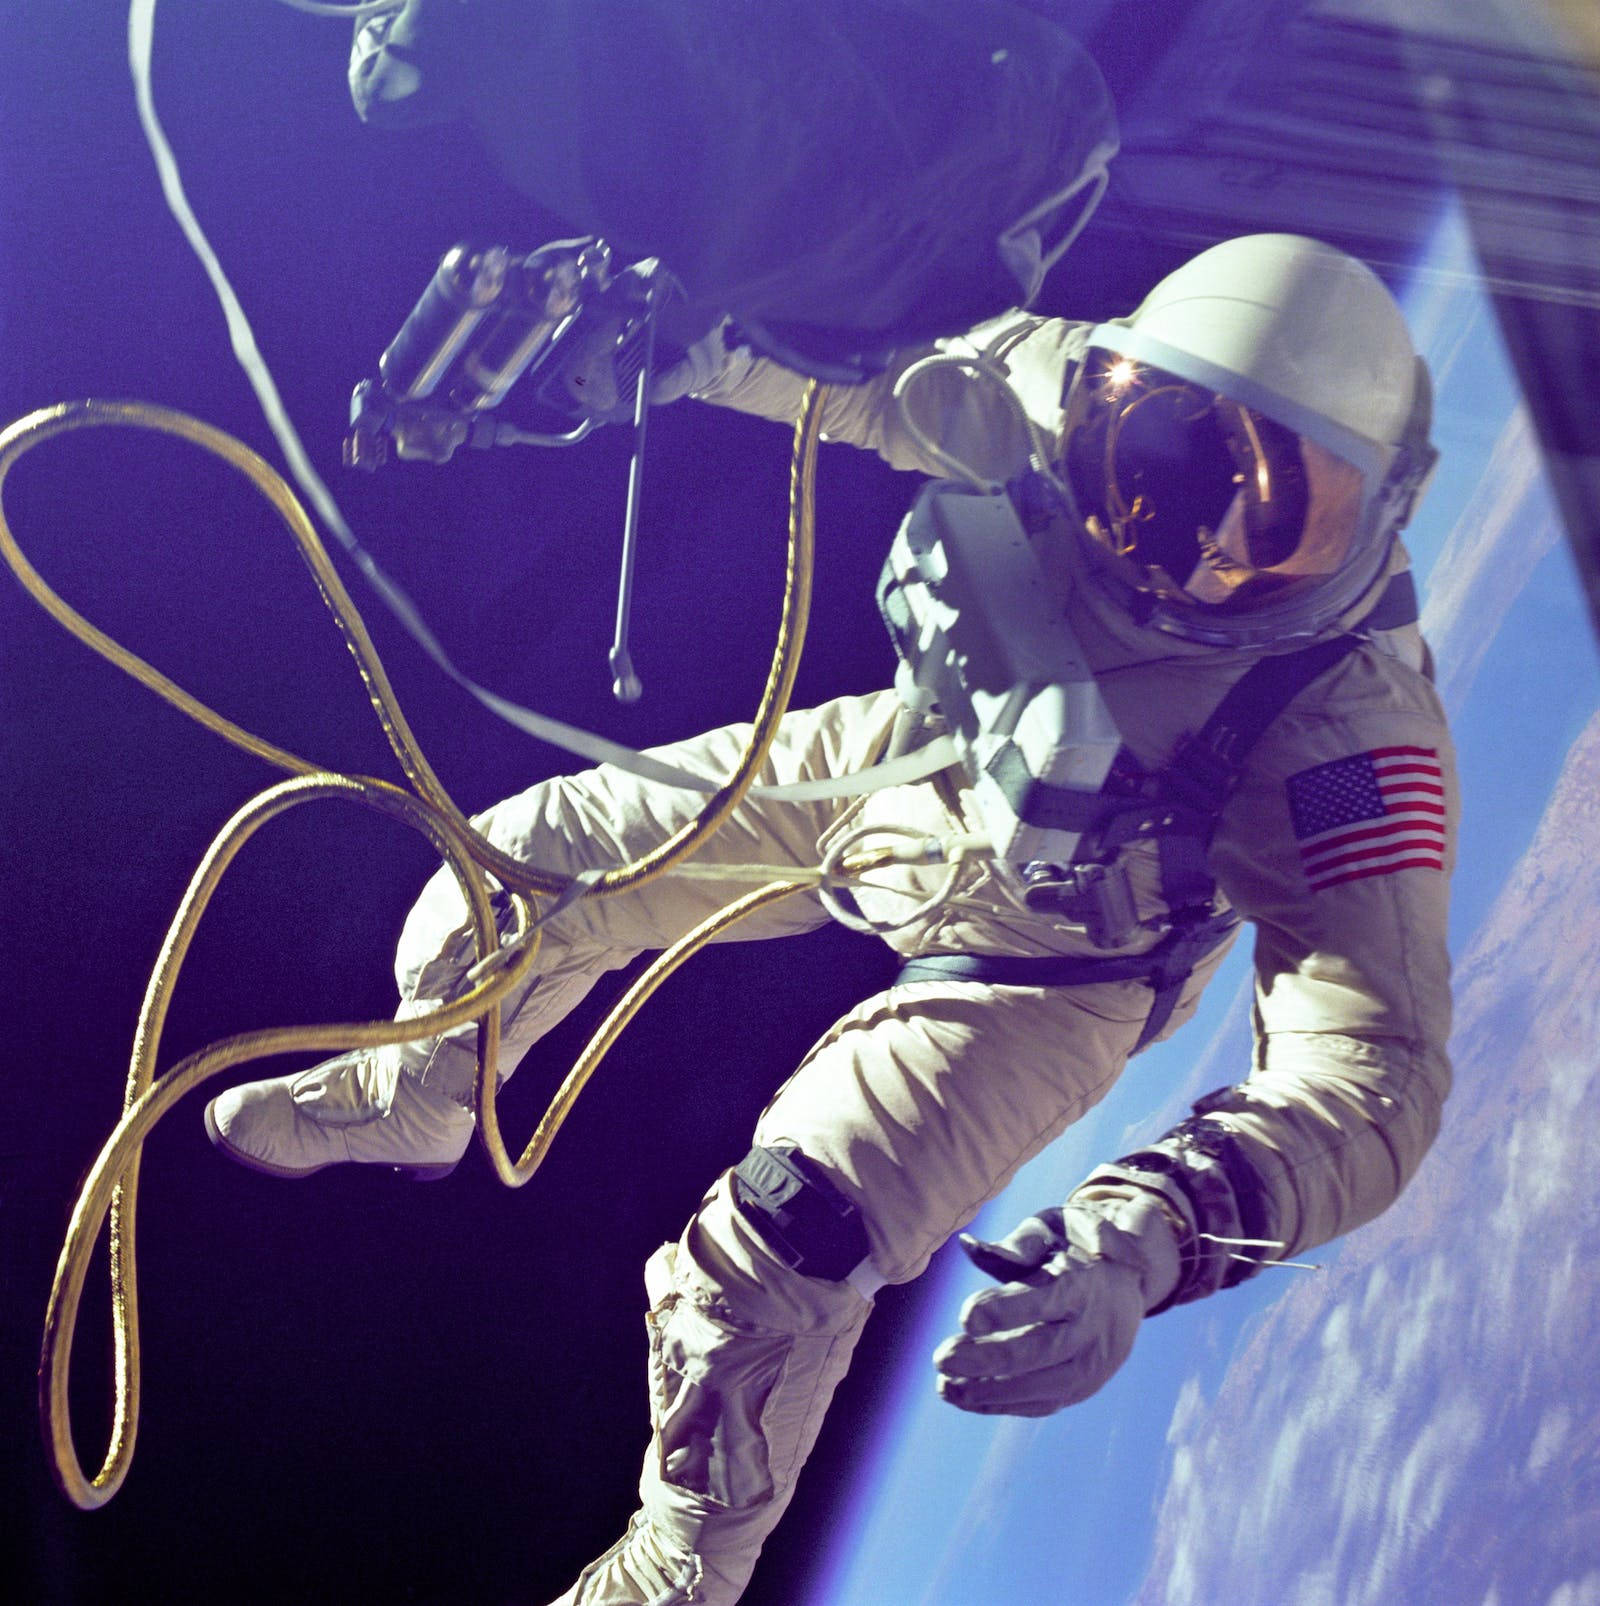 Edward White An Astronaut In Space Wallpaper